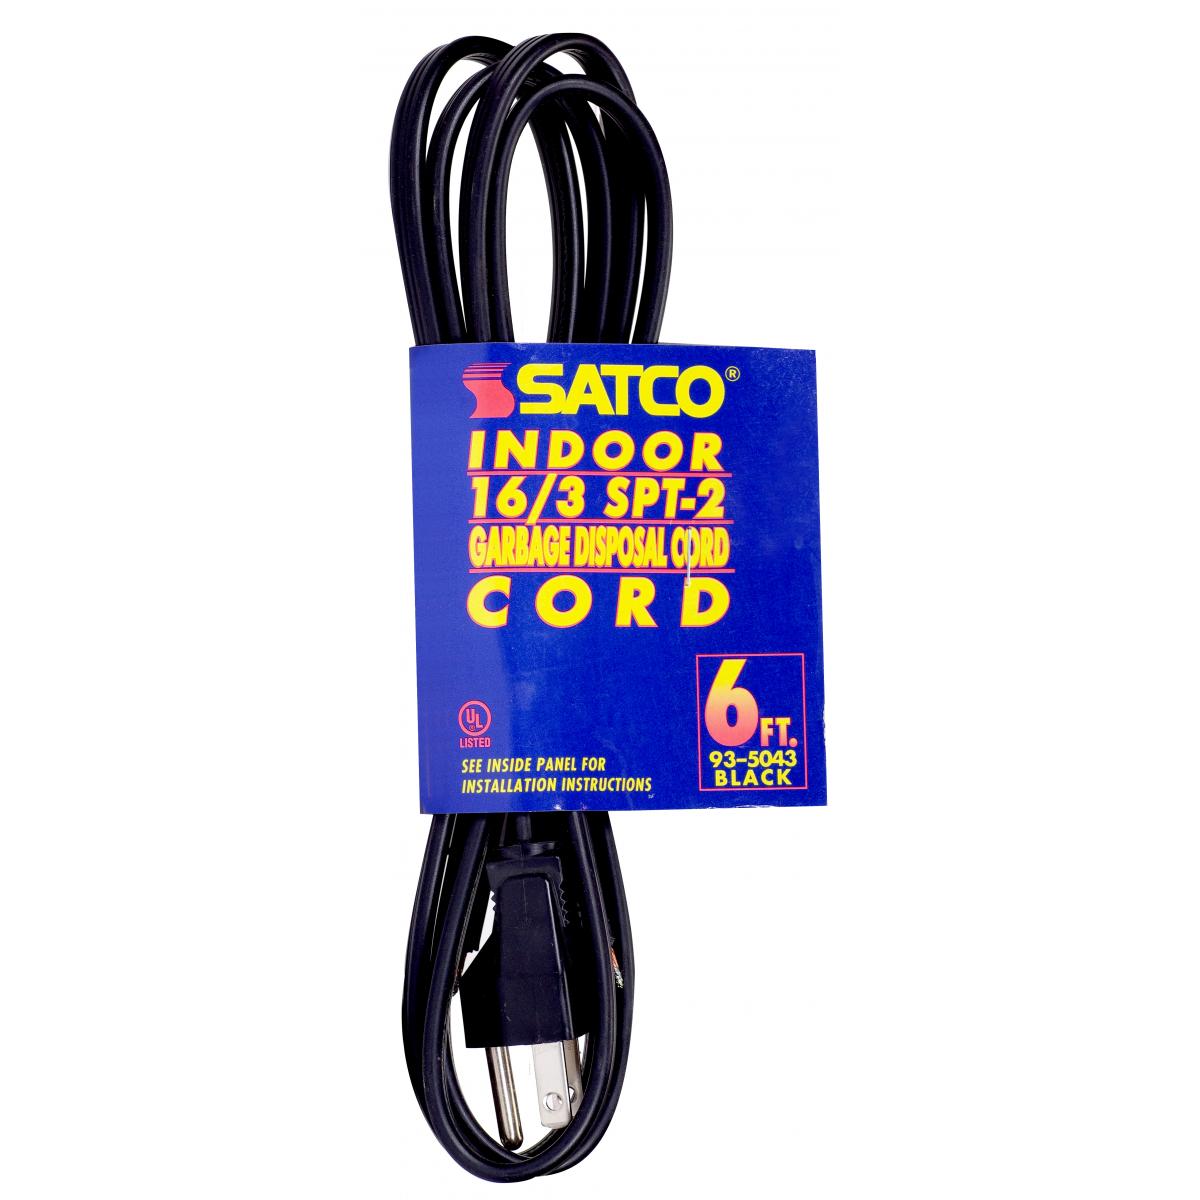 Satco 93-5043 6 Foot, 3 Wire Heavy Duty Replacement Garbage Disposal Cord 16-3 SPT-2 Black Indoor Use Only 13A/125V 1625W